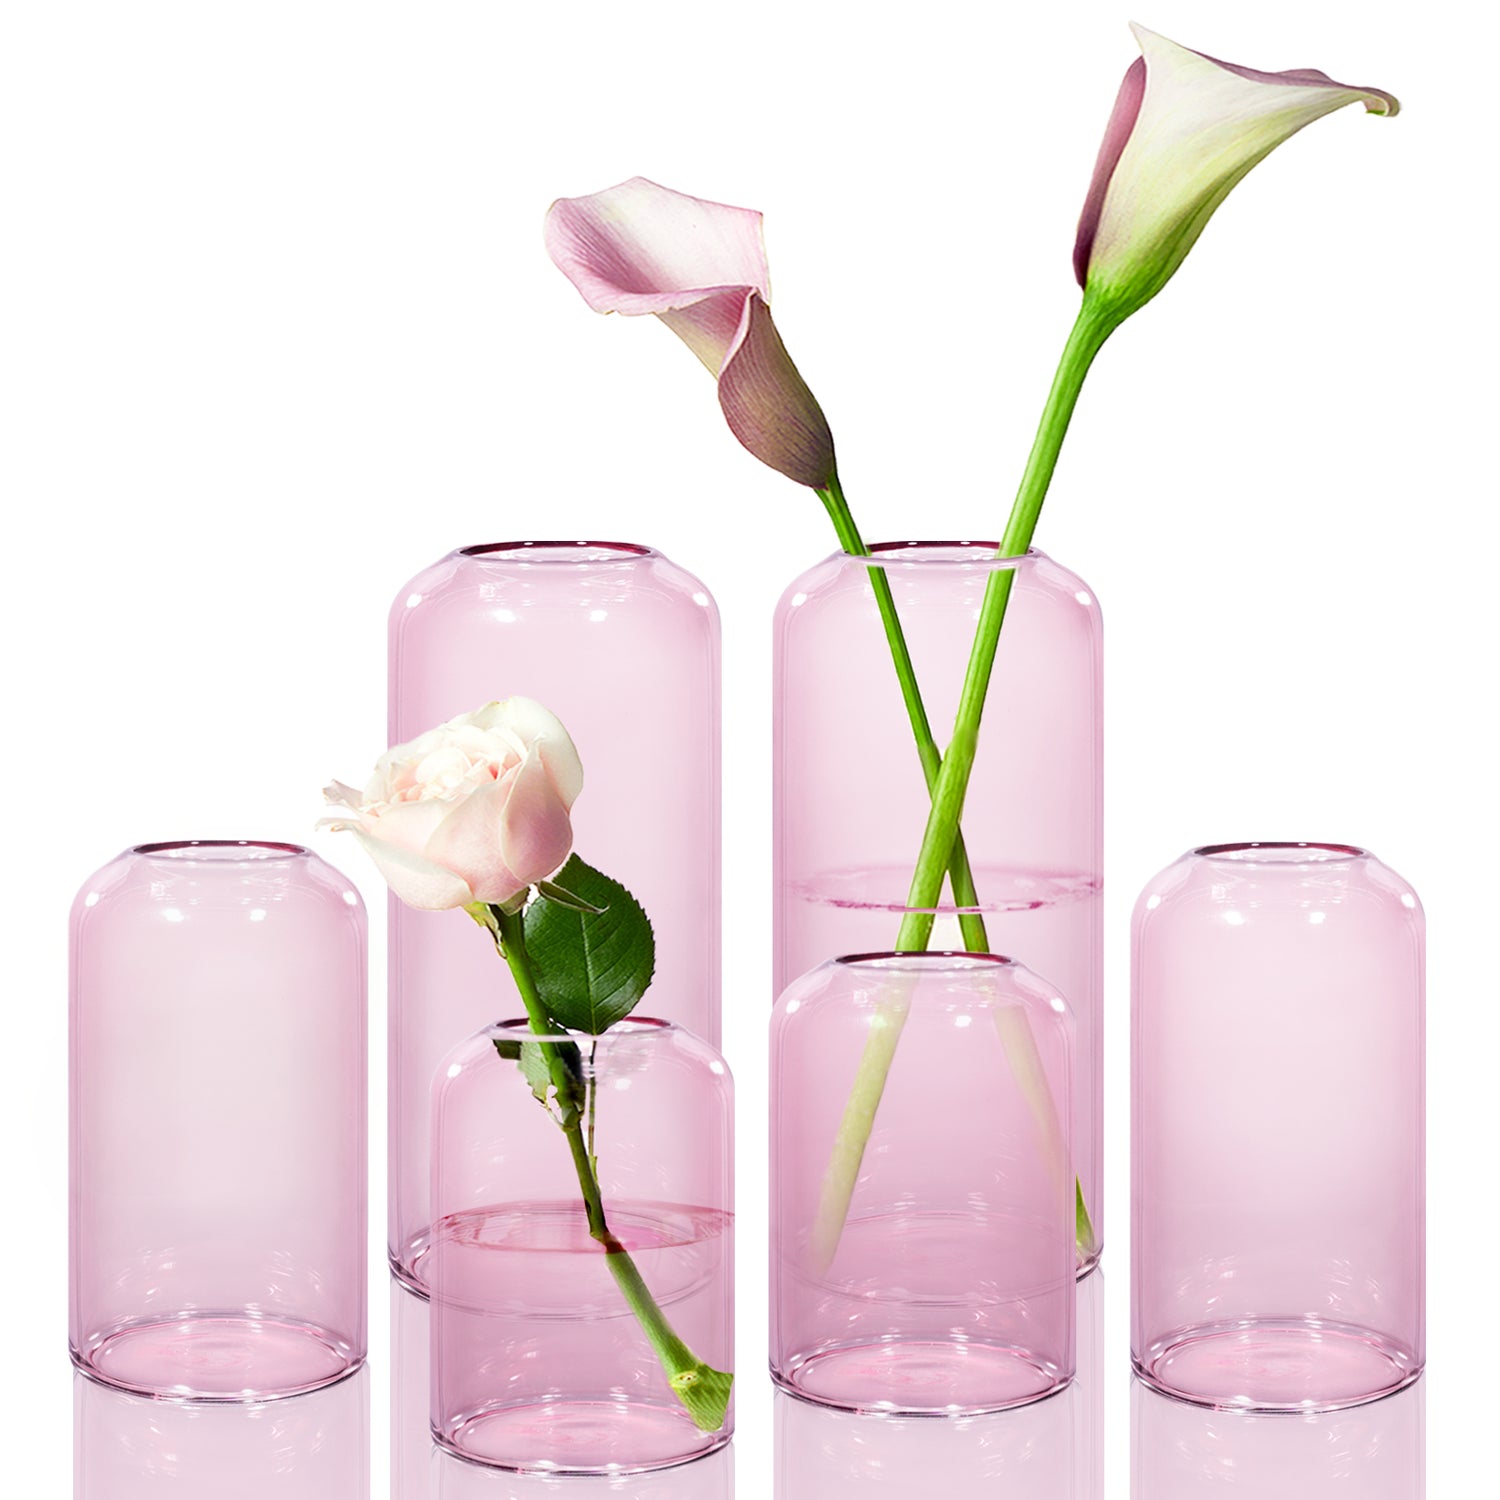 ZENS Pink Bud Vases Set of 6, Modern Cylinder Colored Small Glass Flow ...